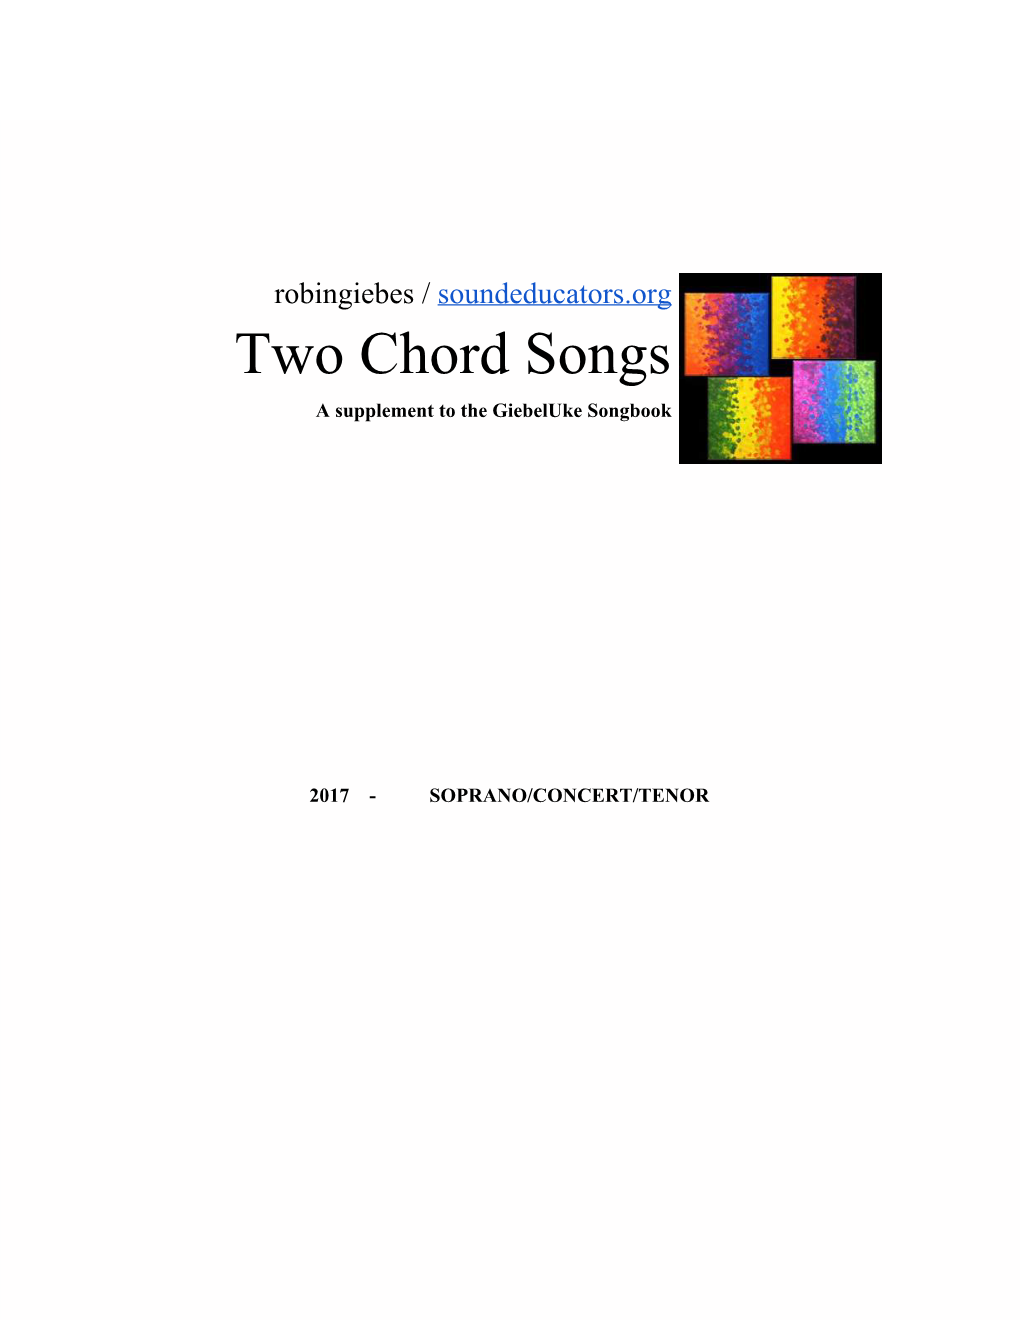 Two Chord Songs a Supplement to the Giebeluke Songbook